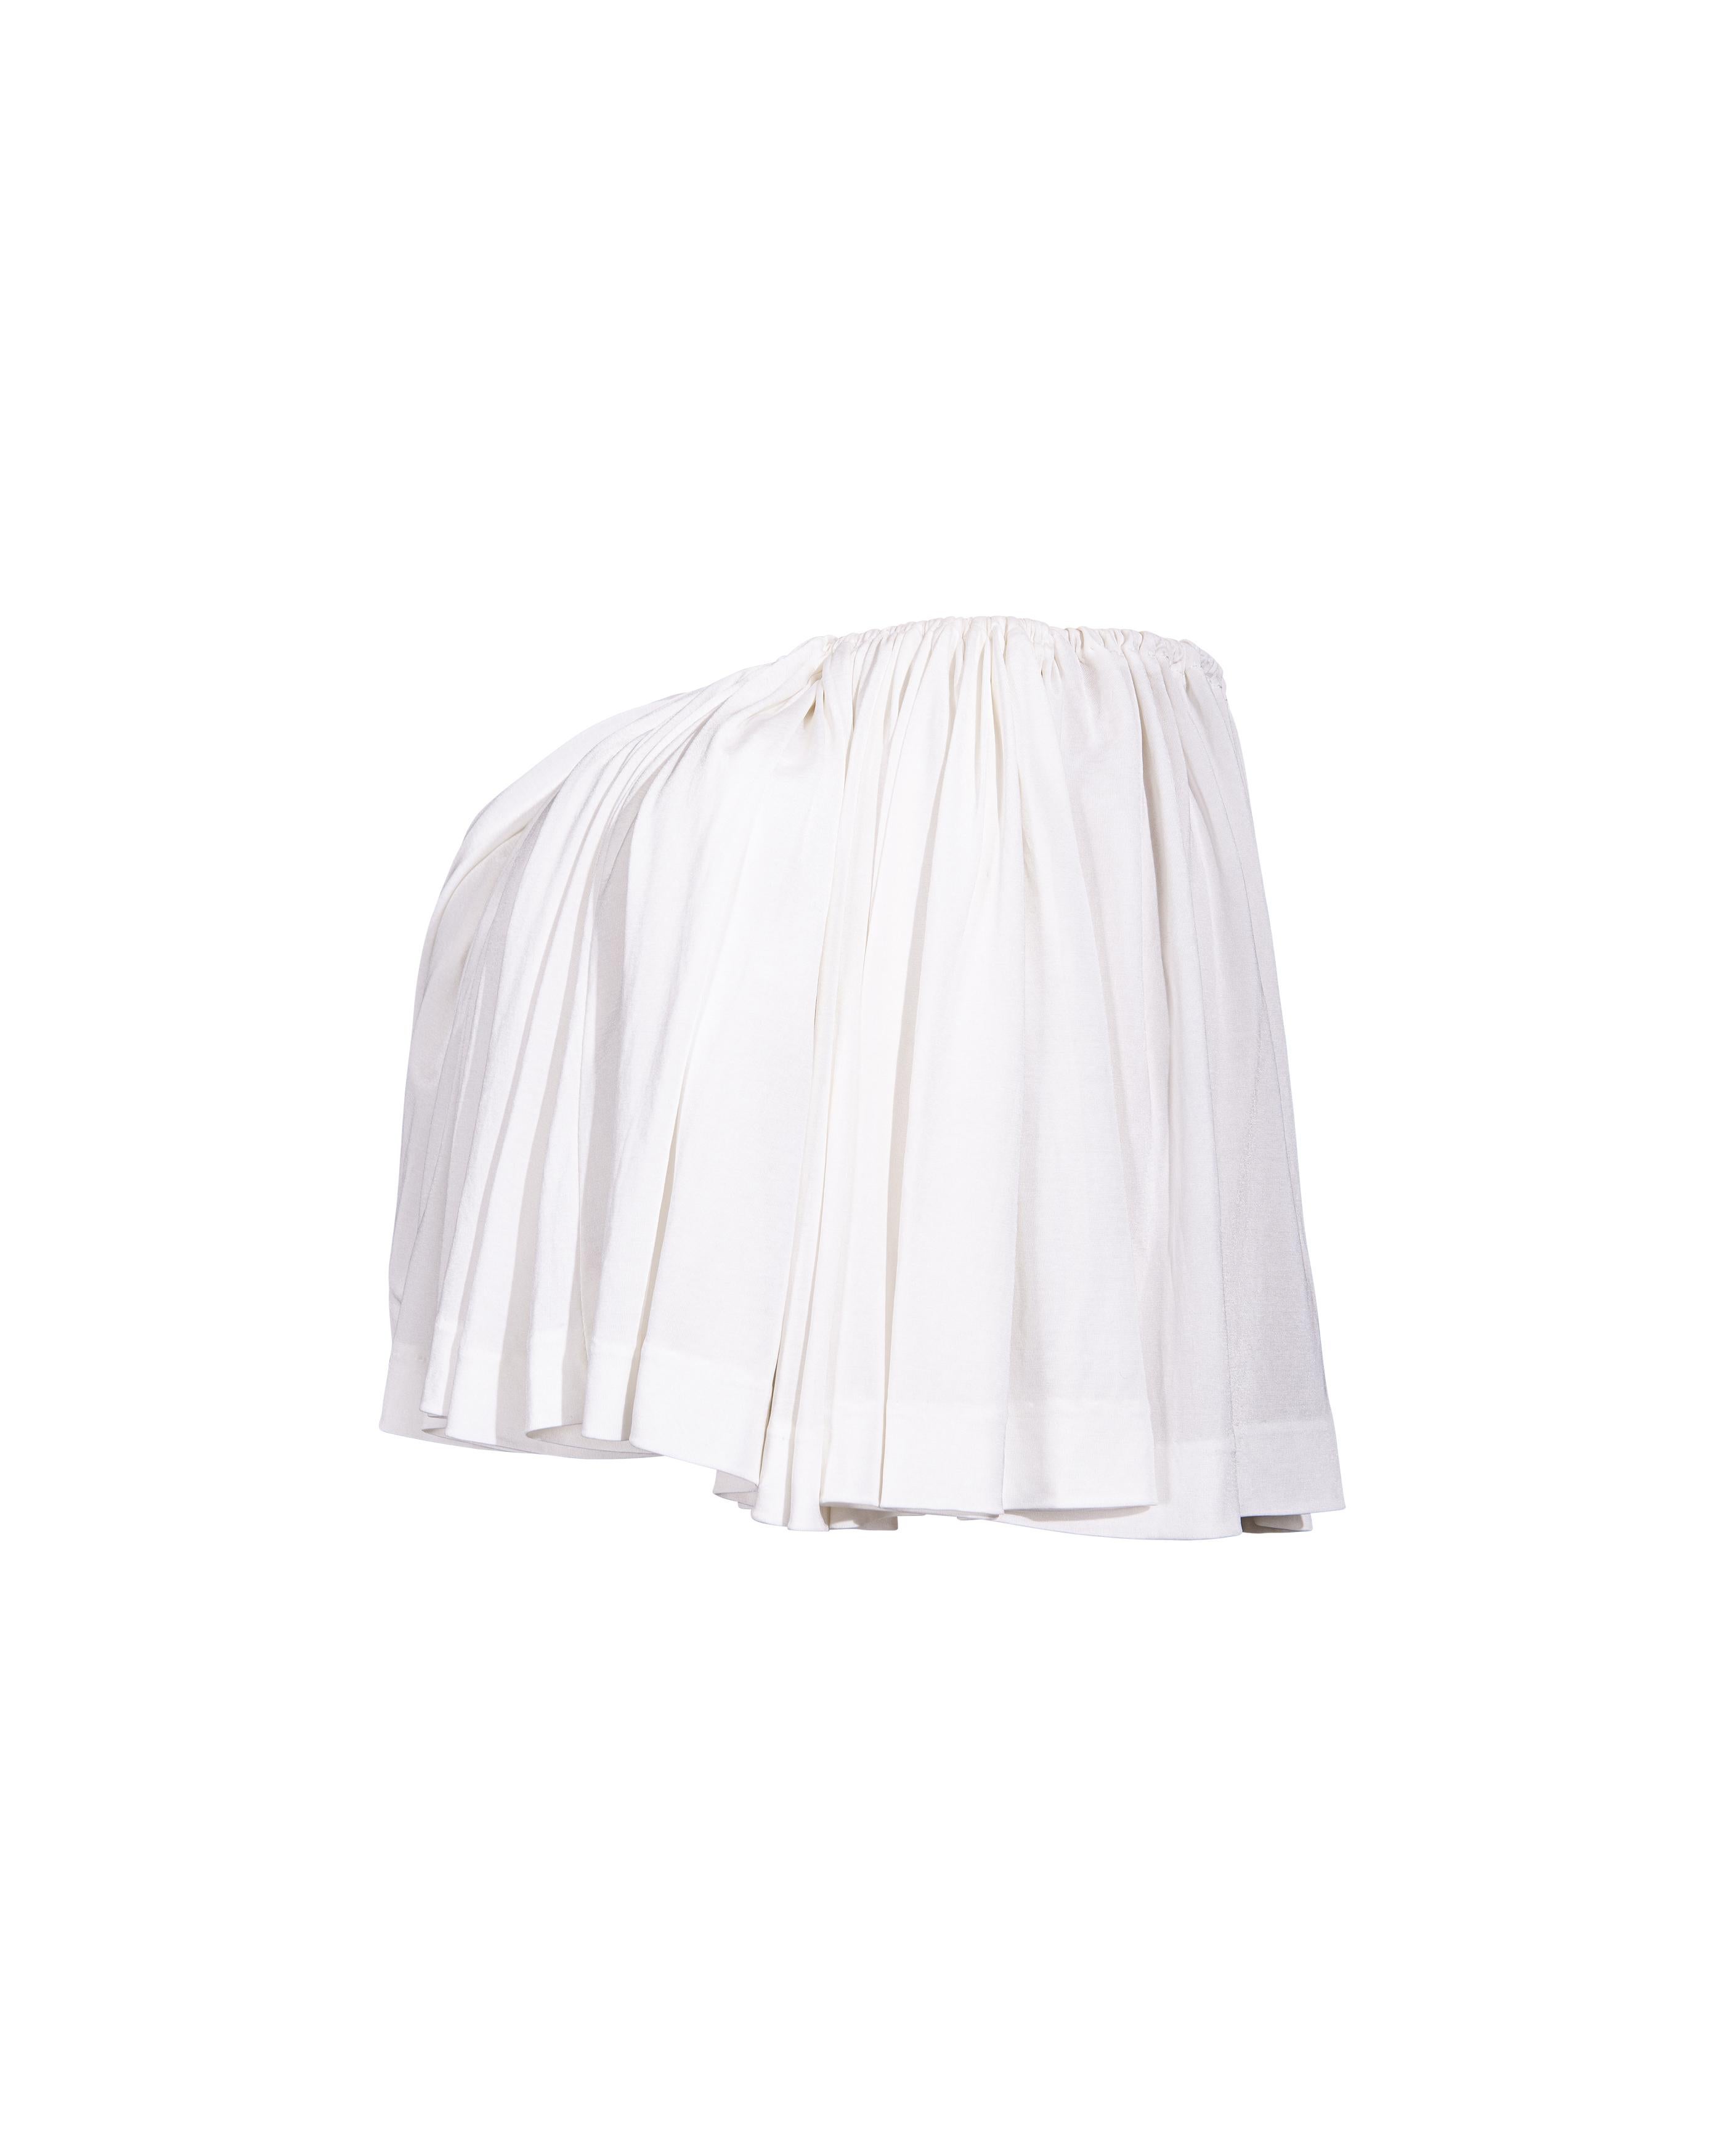 S/S 1988 Vivienne Westwood White Mini Skirt with Removable Bustle For Sale 2